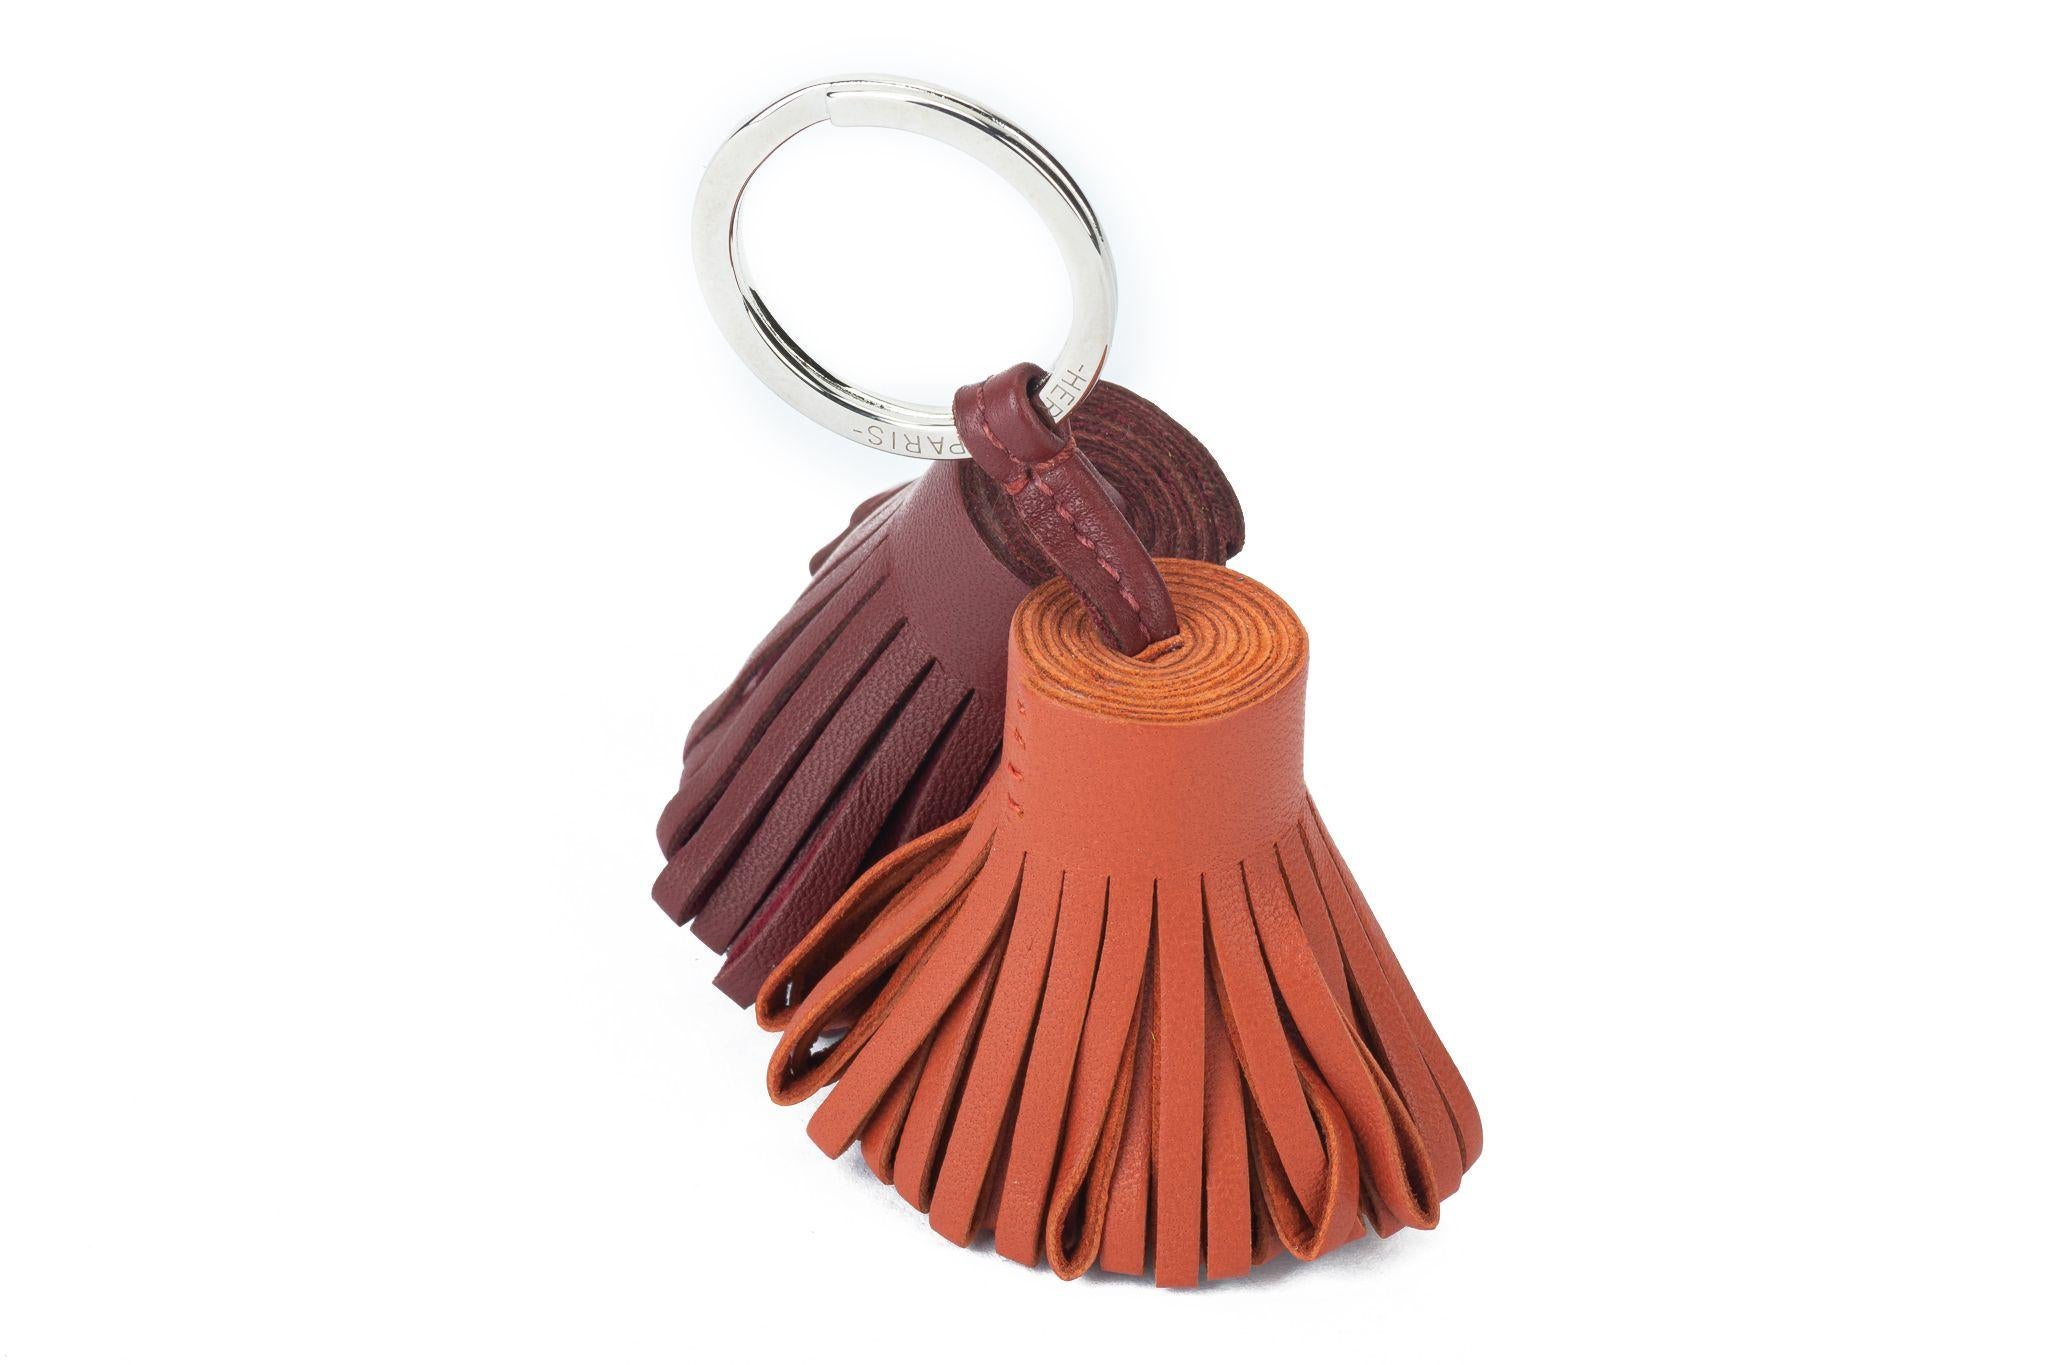 Hermès brand new double carmen bag charm/keychain Comes with original box and gift receipt.